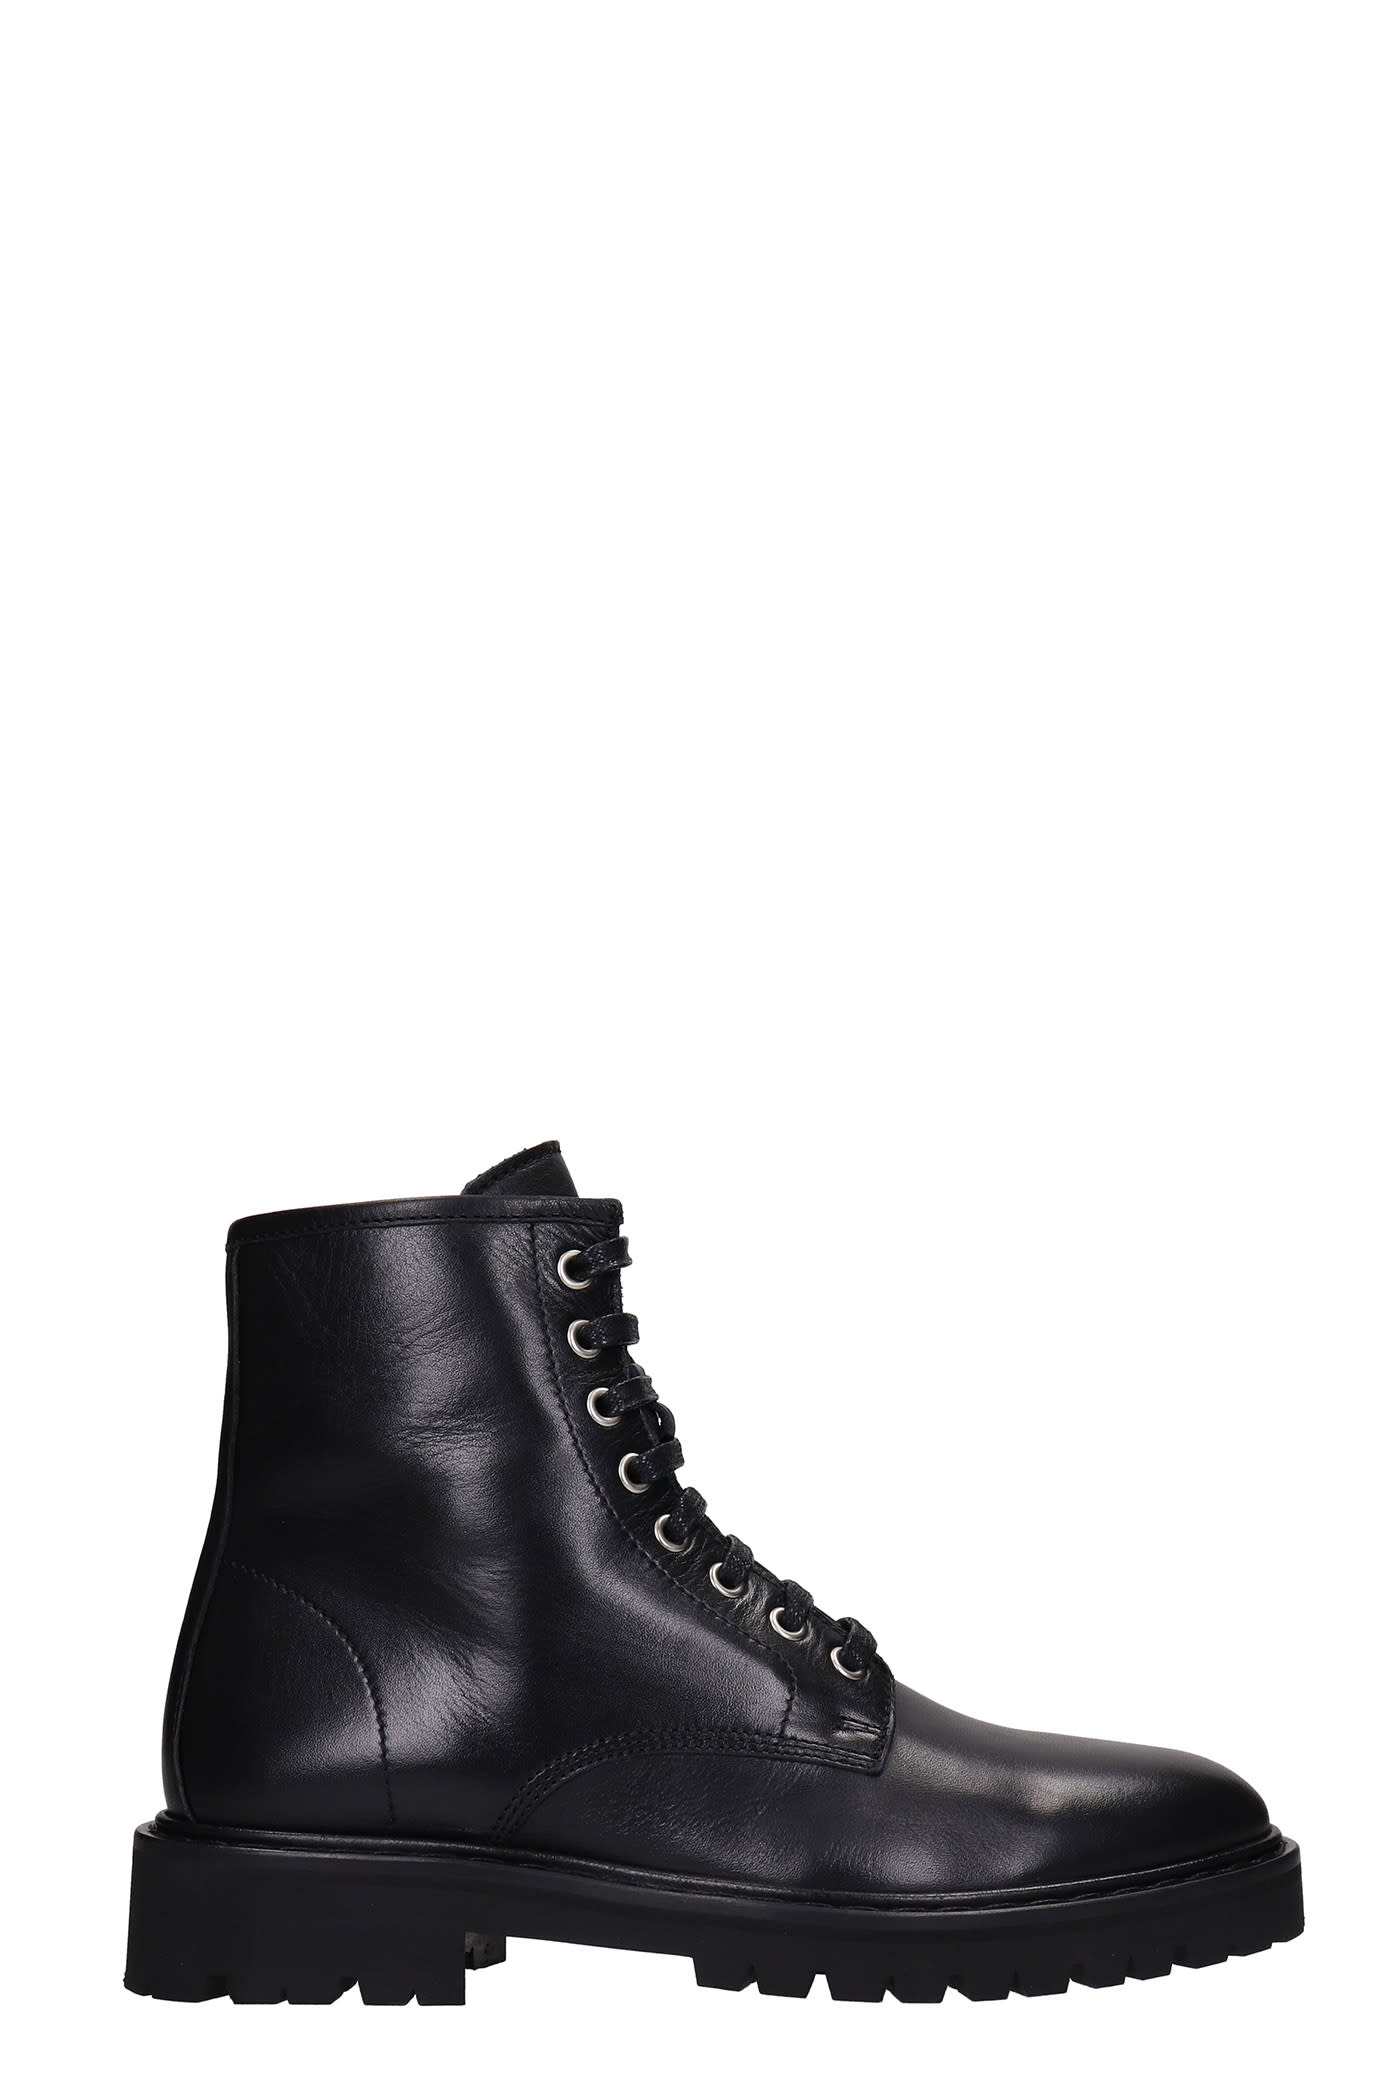 IRO Faye Combat Boots In Black Leather